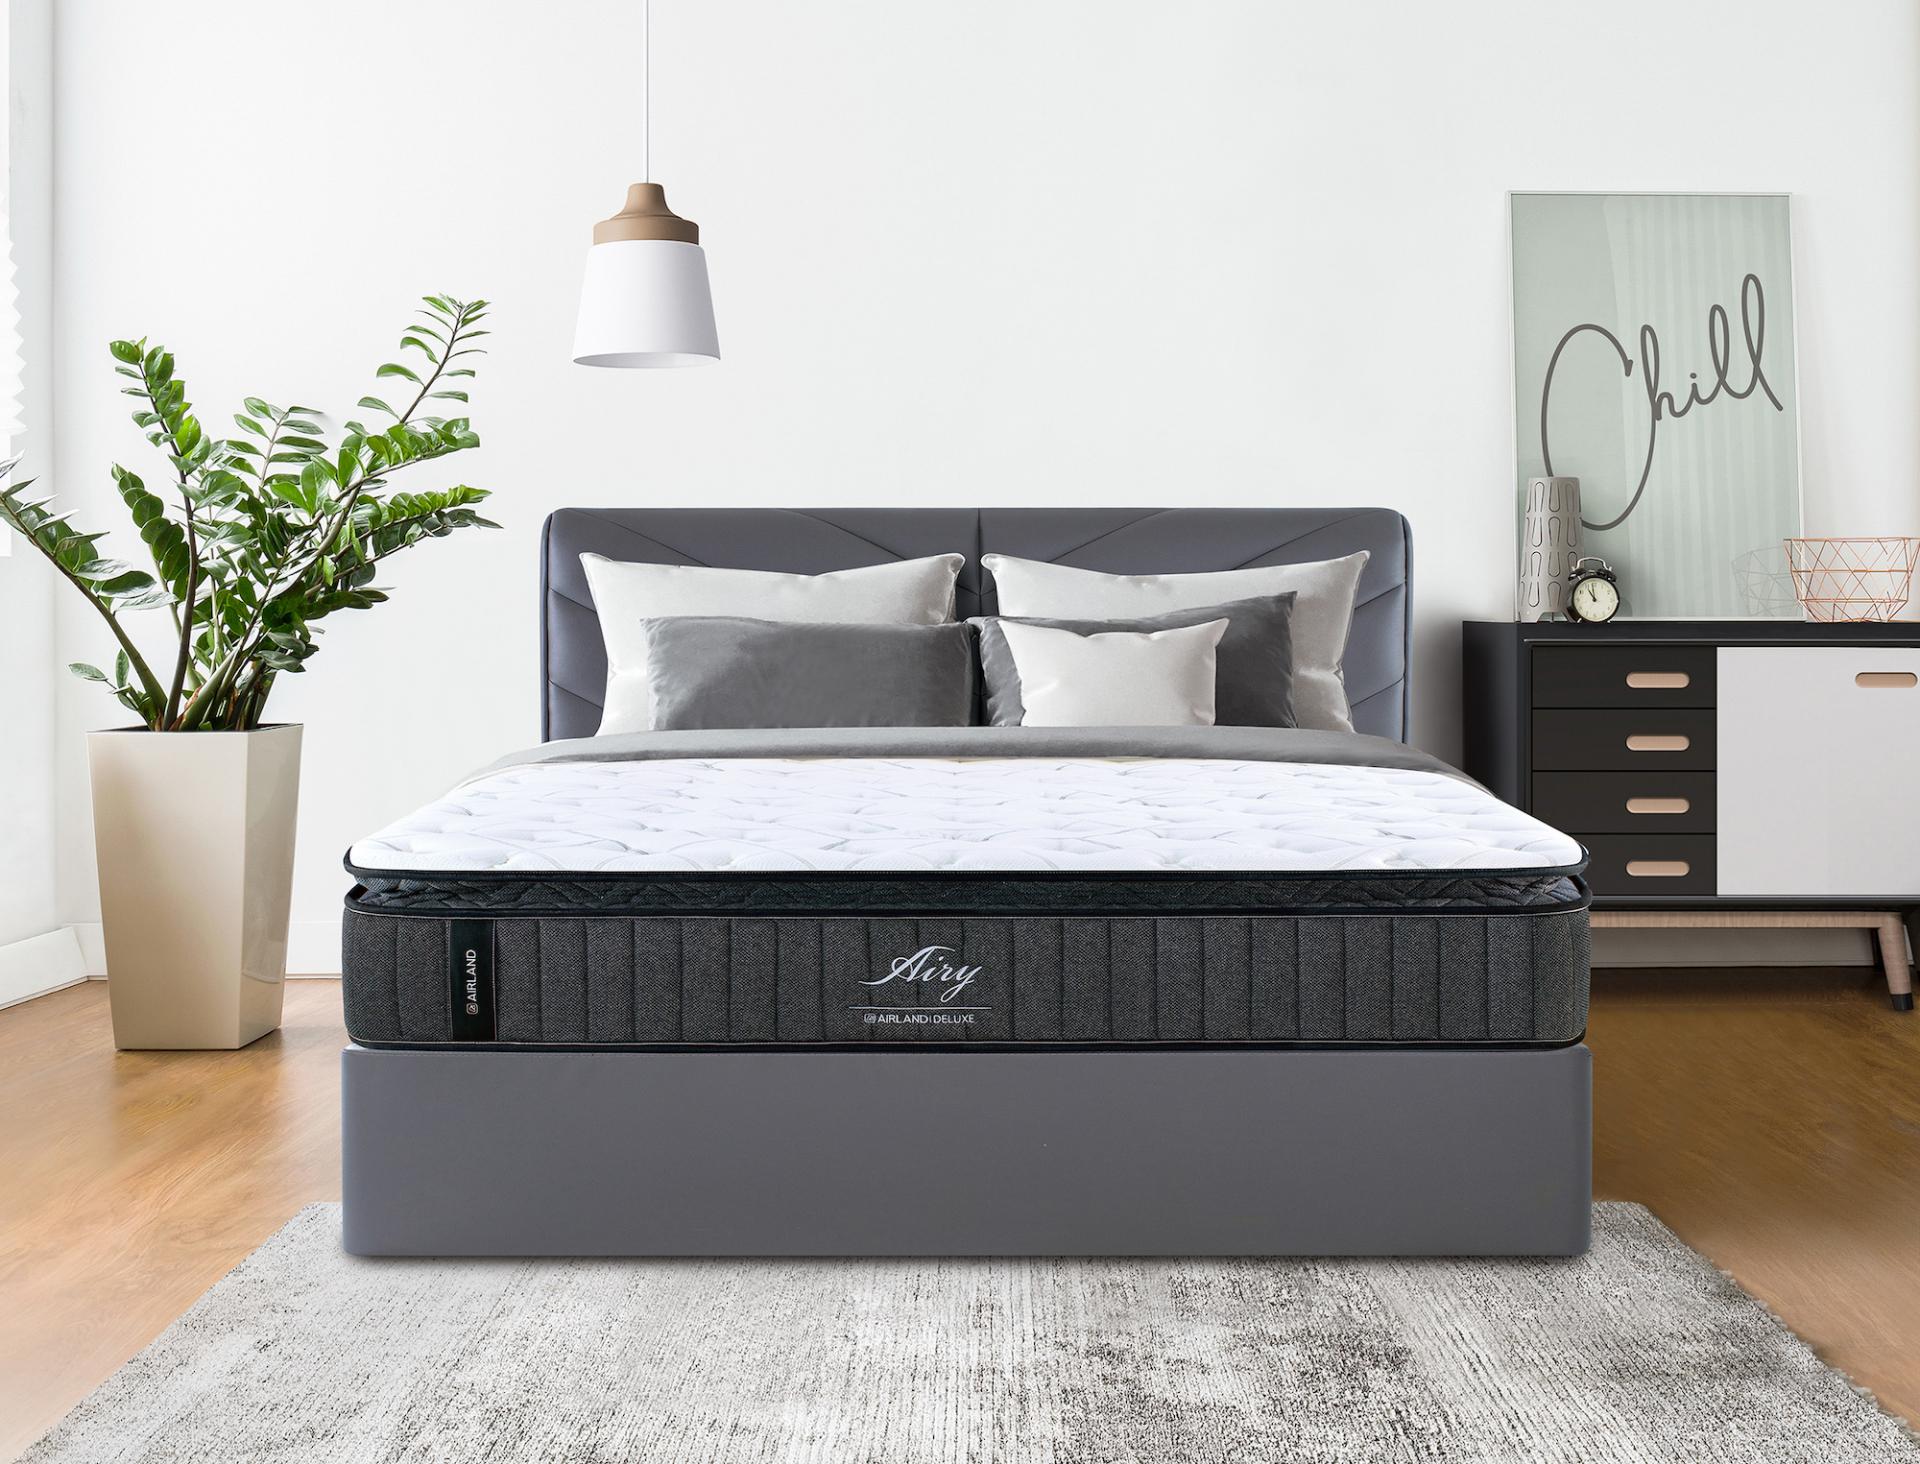 AIRLAND's quality mattresses will seriously elevate your sleeping experience